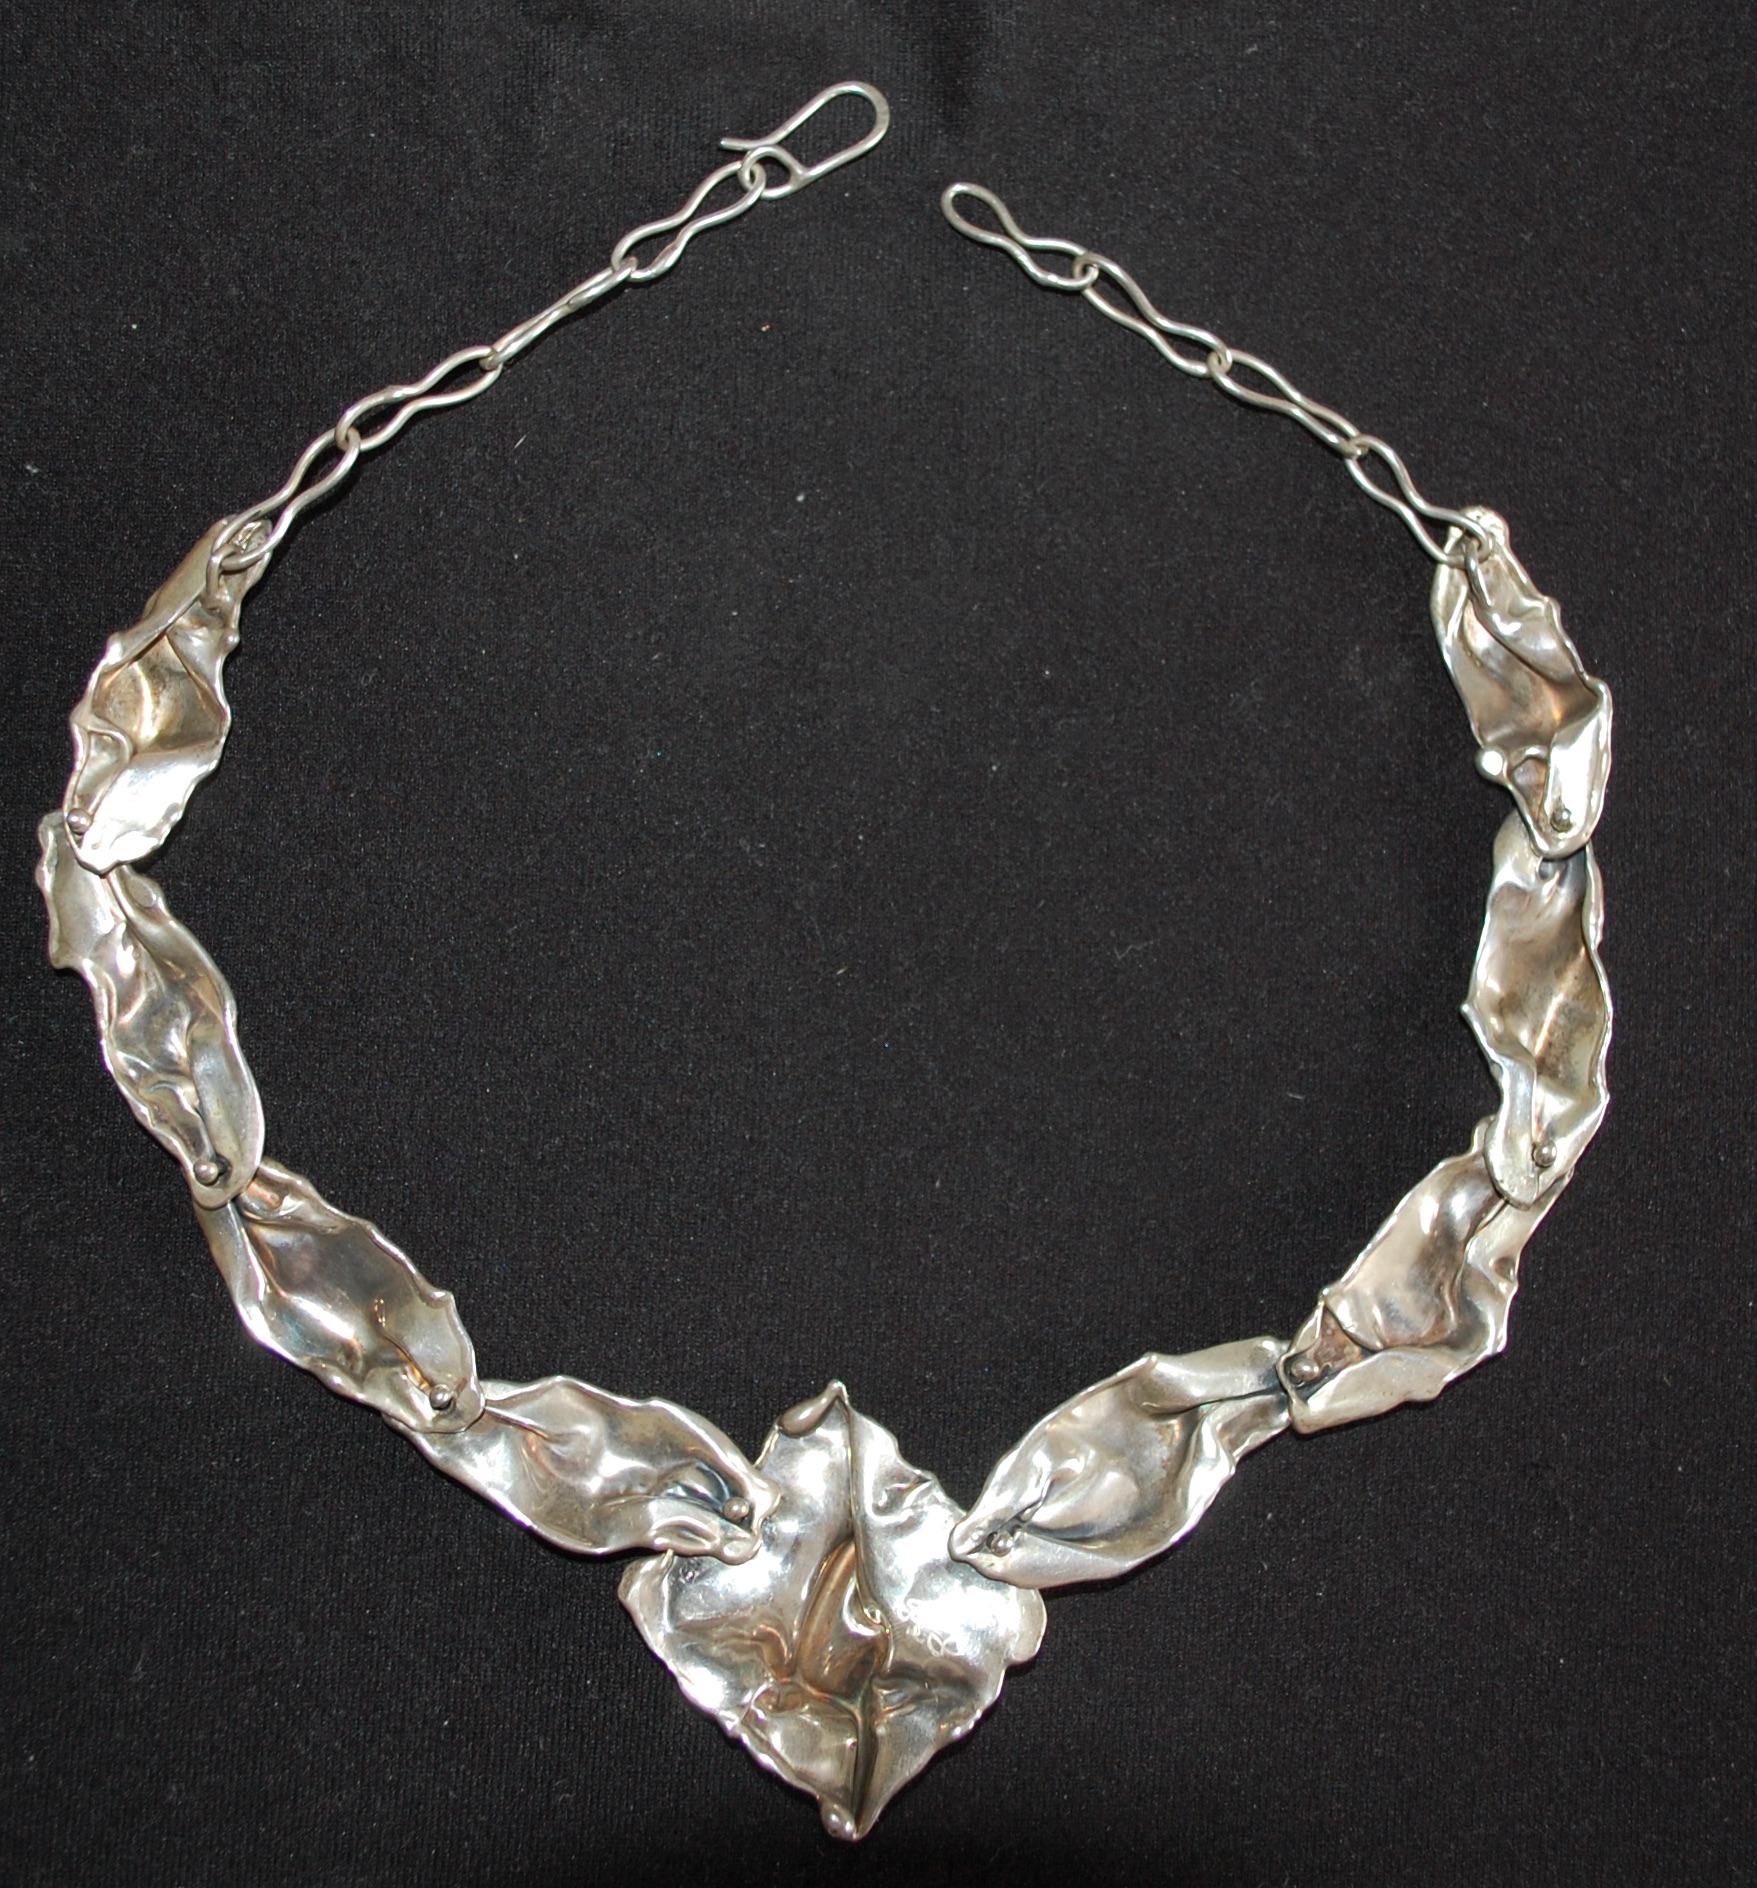 Modern Artisan Sterling Necklace In Excellent Condition For Sale In Lake Worth, FL